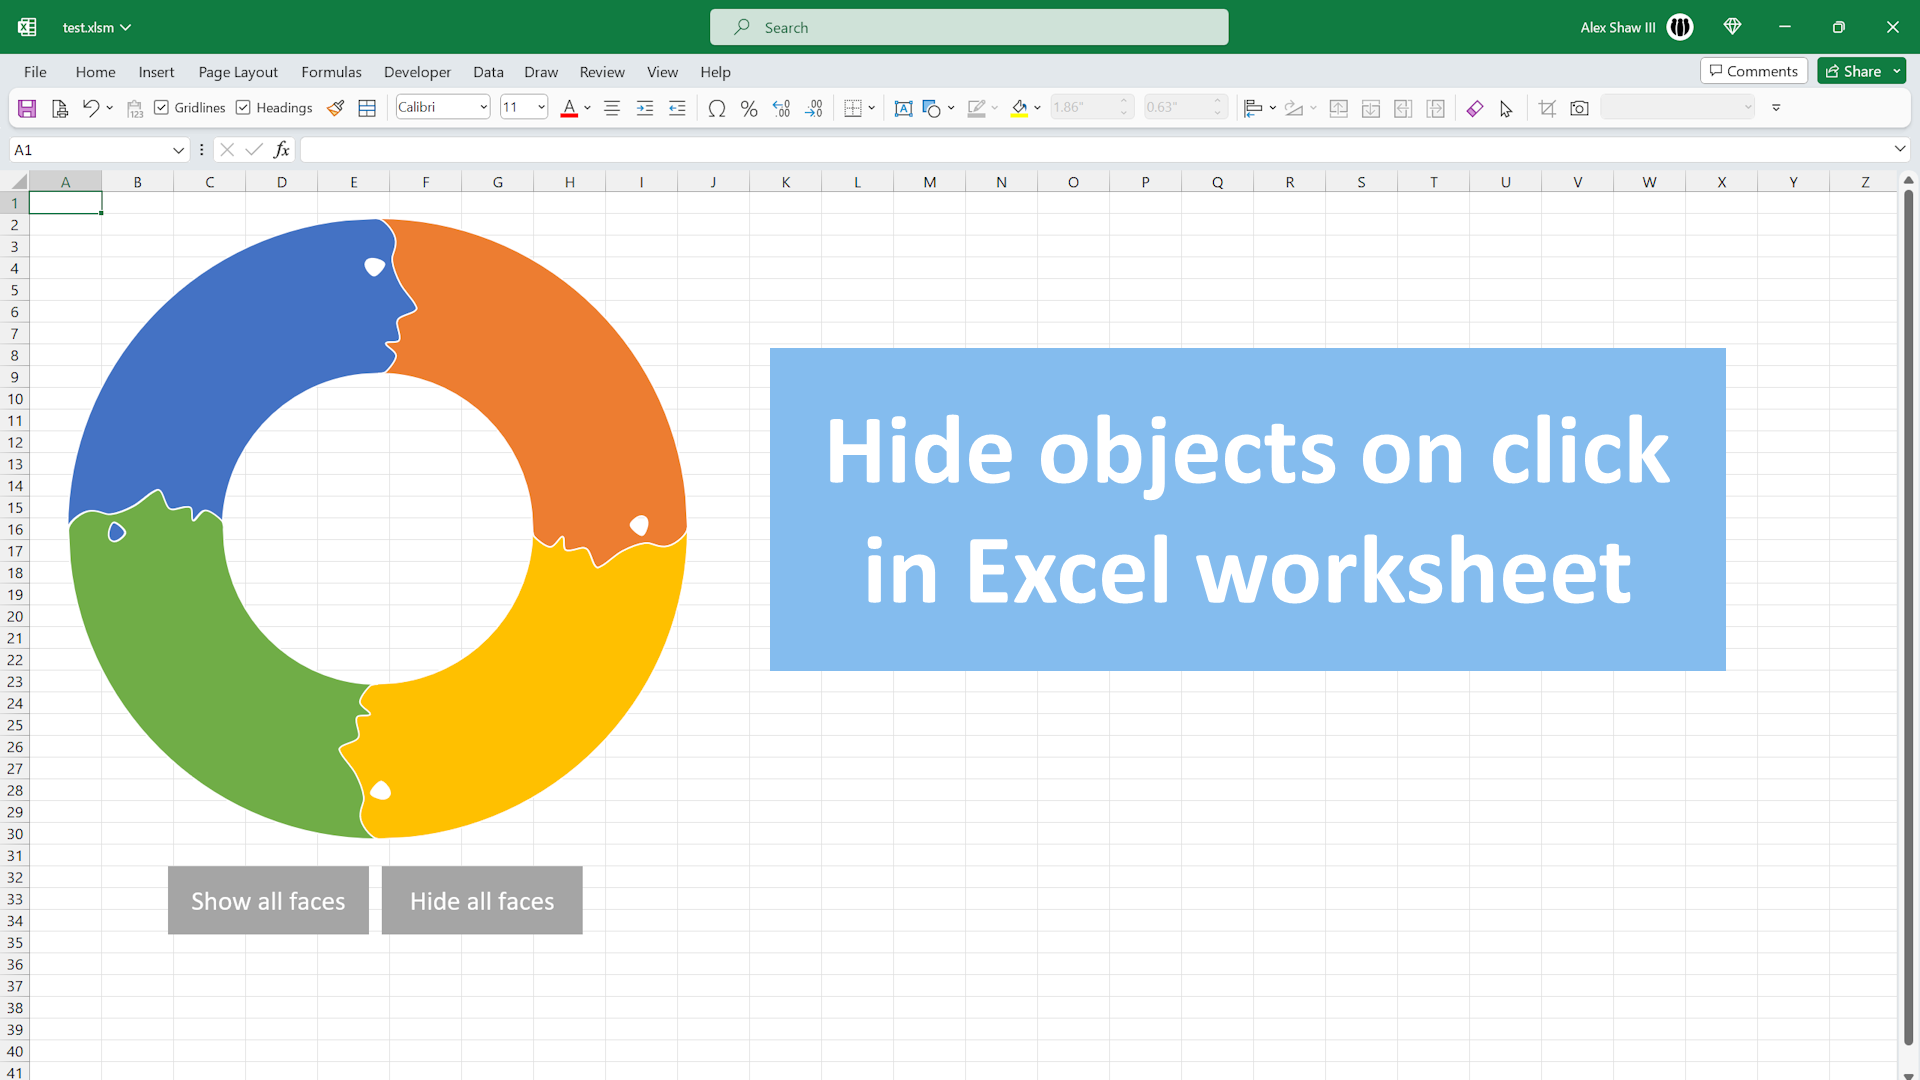 Hide objects on click in Excel with VBA - How-to video - Techronology